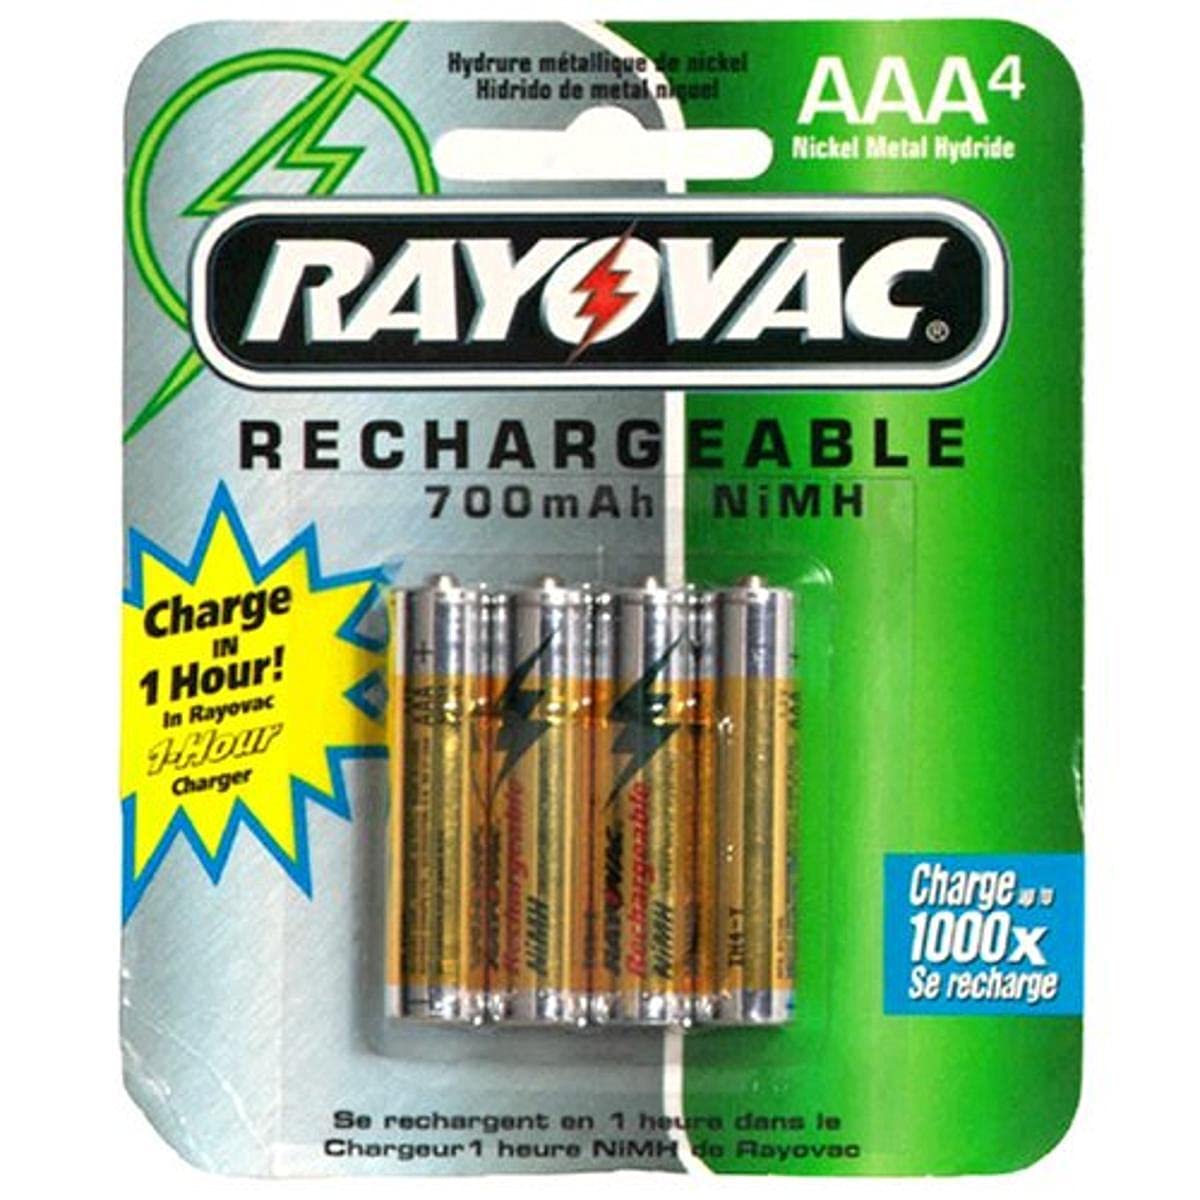 Rayovac Rechargeable NiMH Batteries